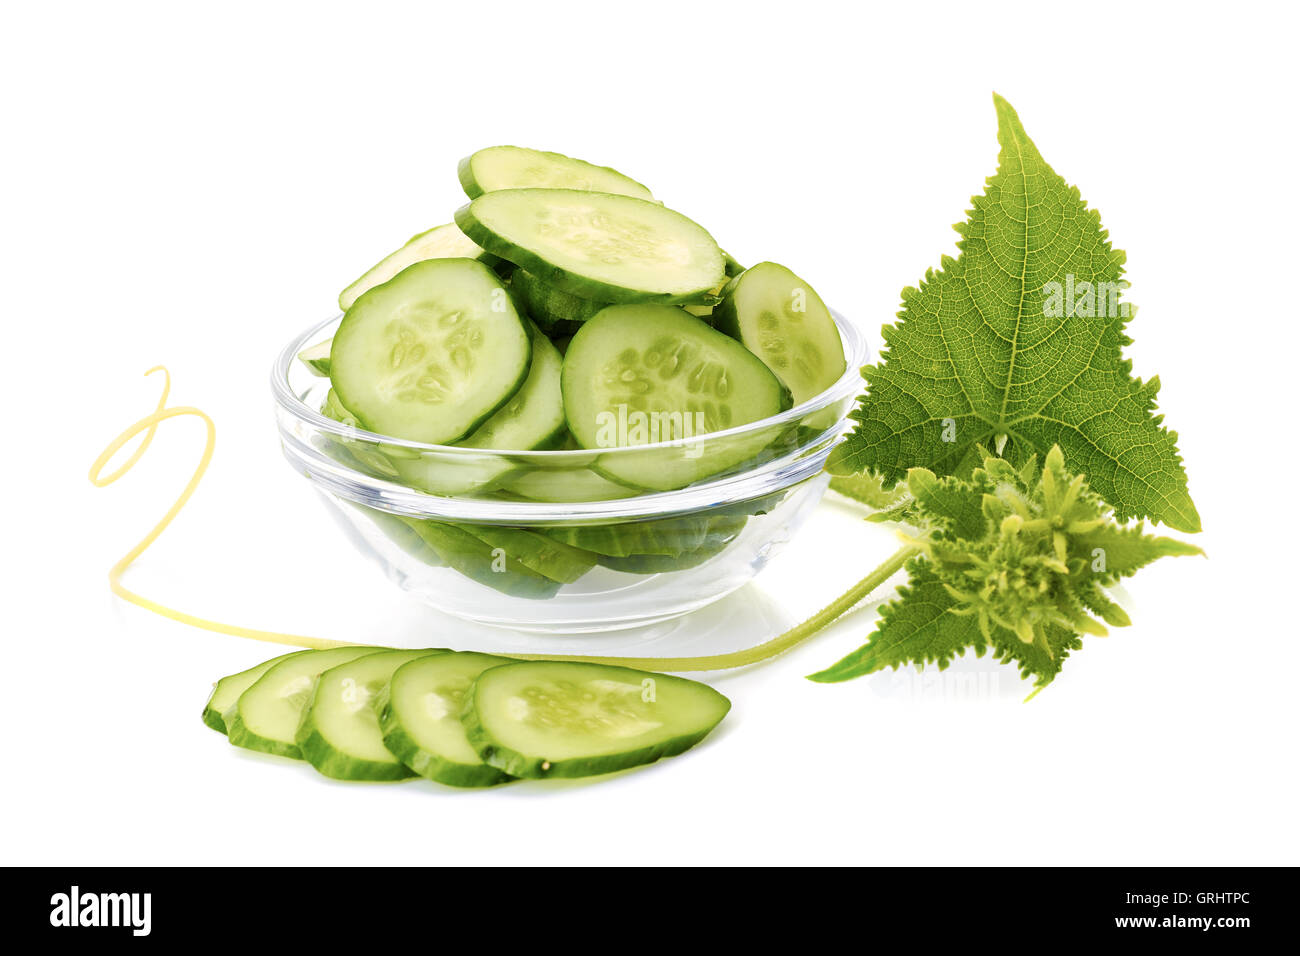 Sliced cucumber in glass bowl vith leaves on white Stock Photo